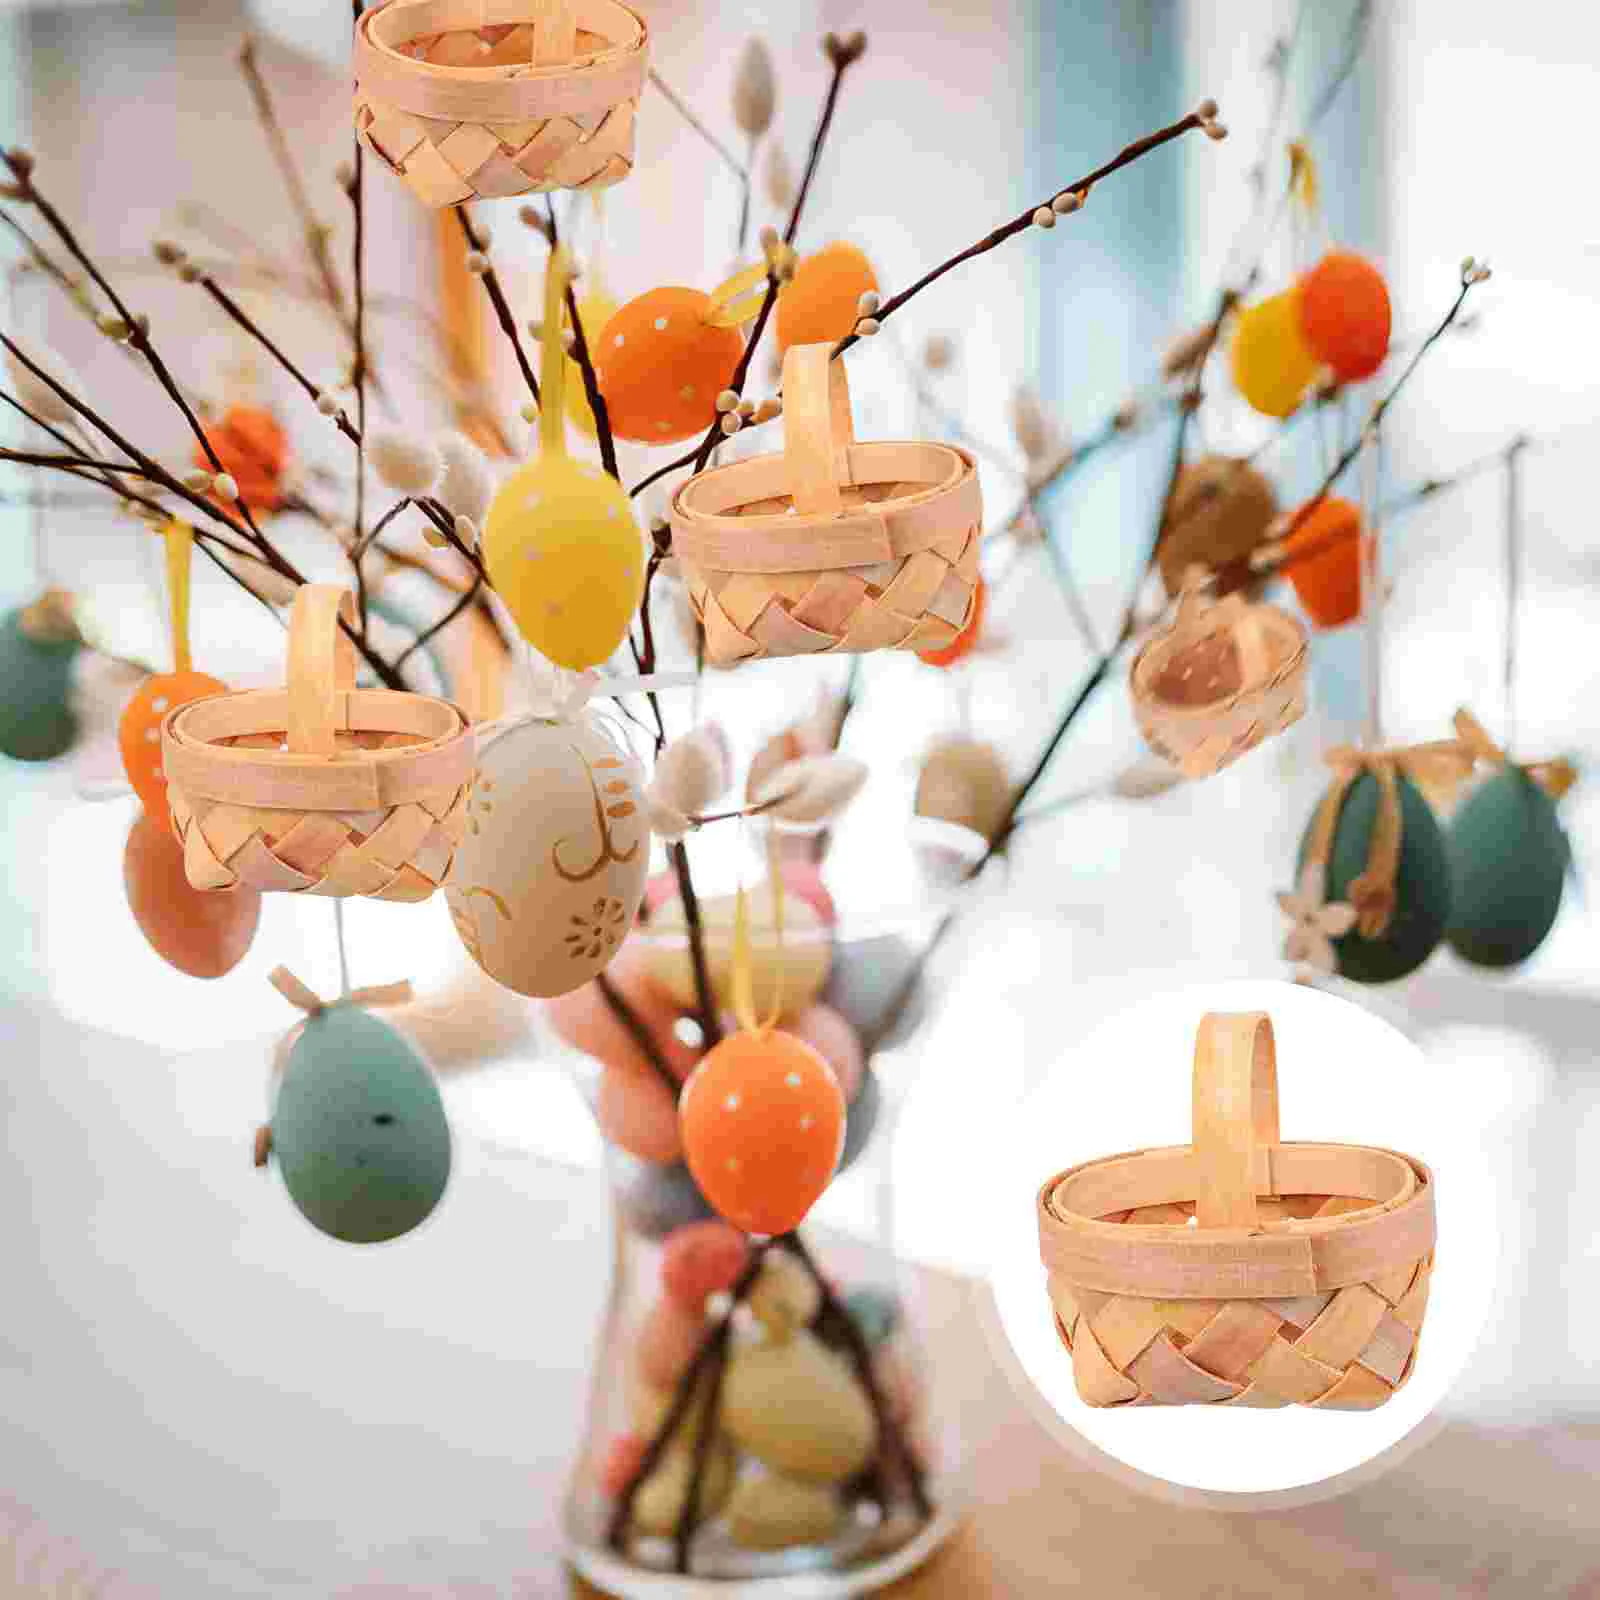 

12pcs Miniature Woven Baskets with Handles Small Wood Chip Baskets Tiny Picnic Basket Party Favor Basket for Fairy Garden